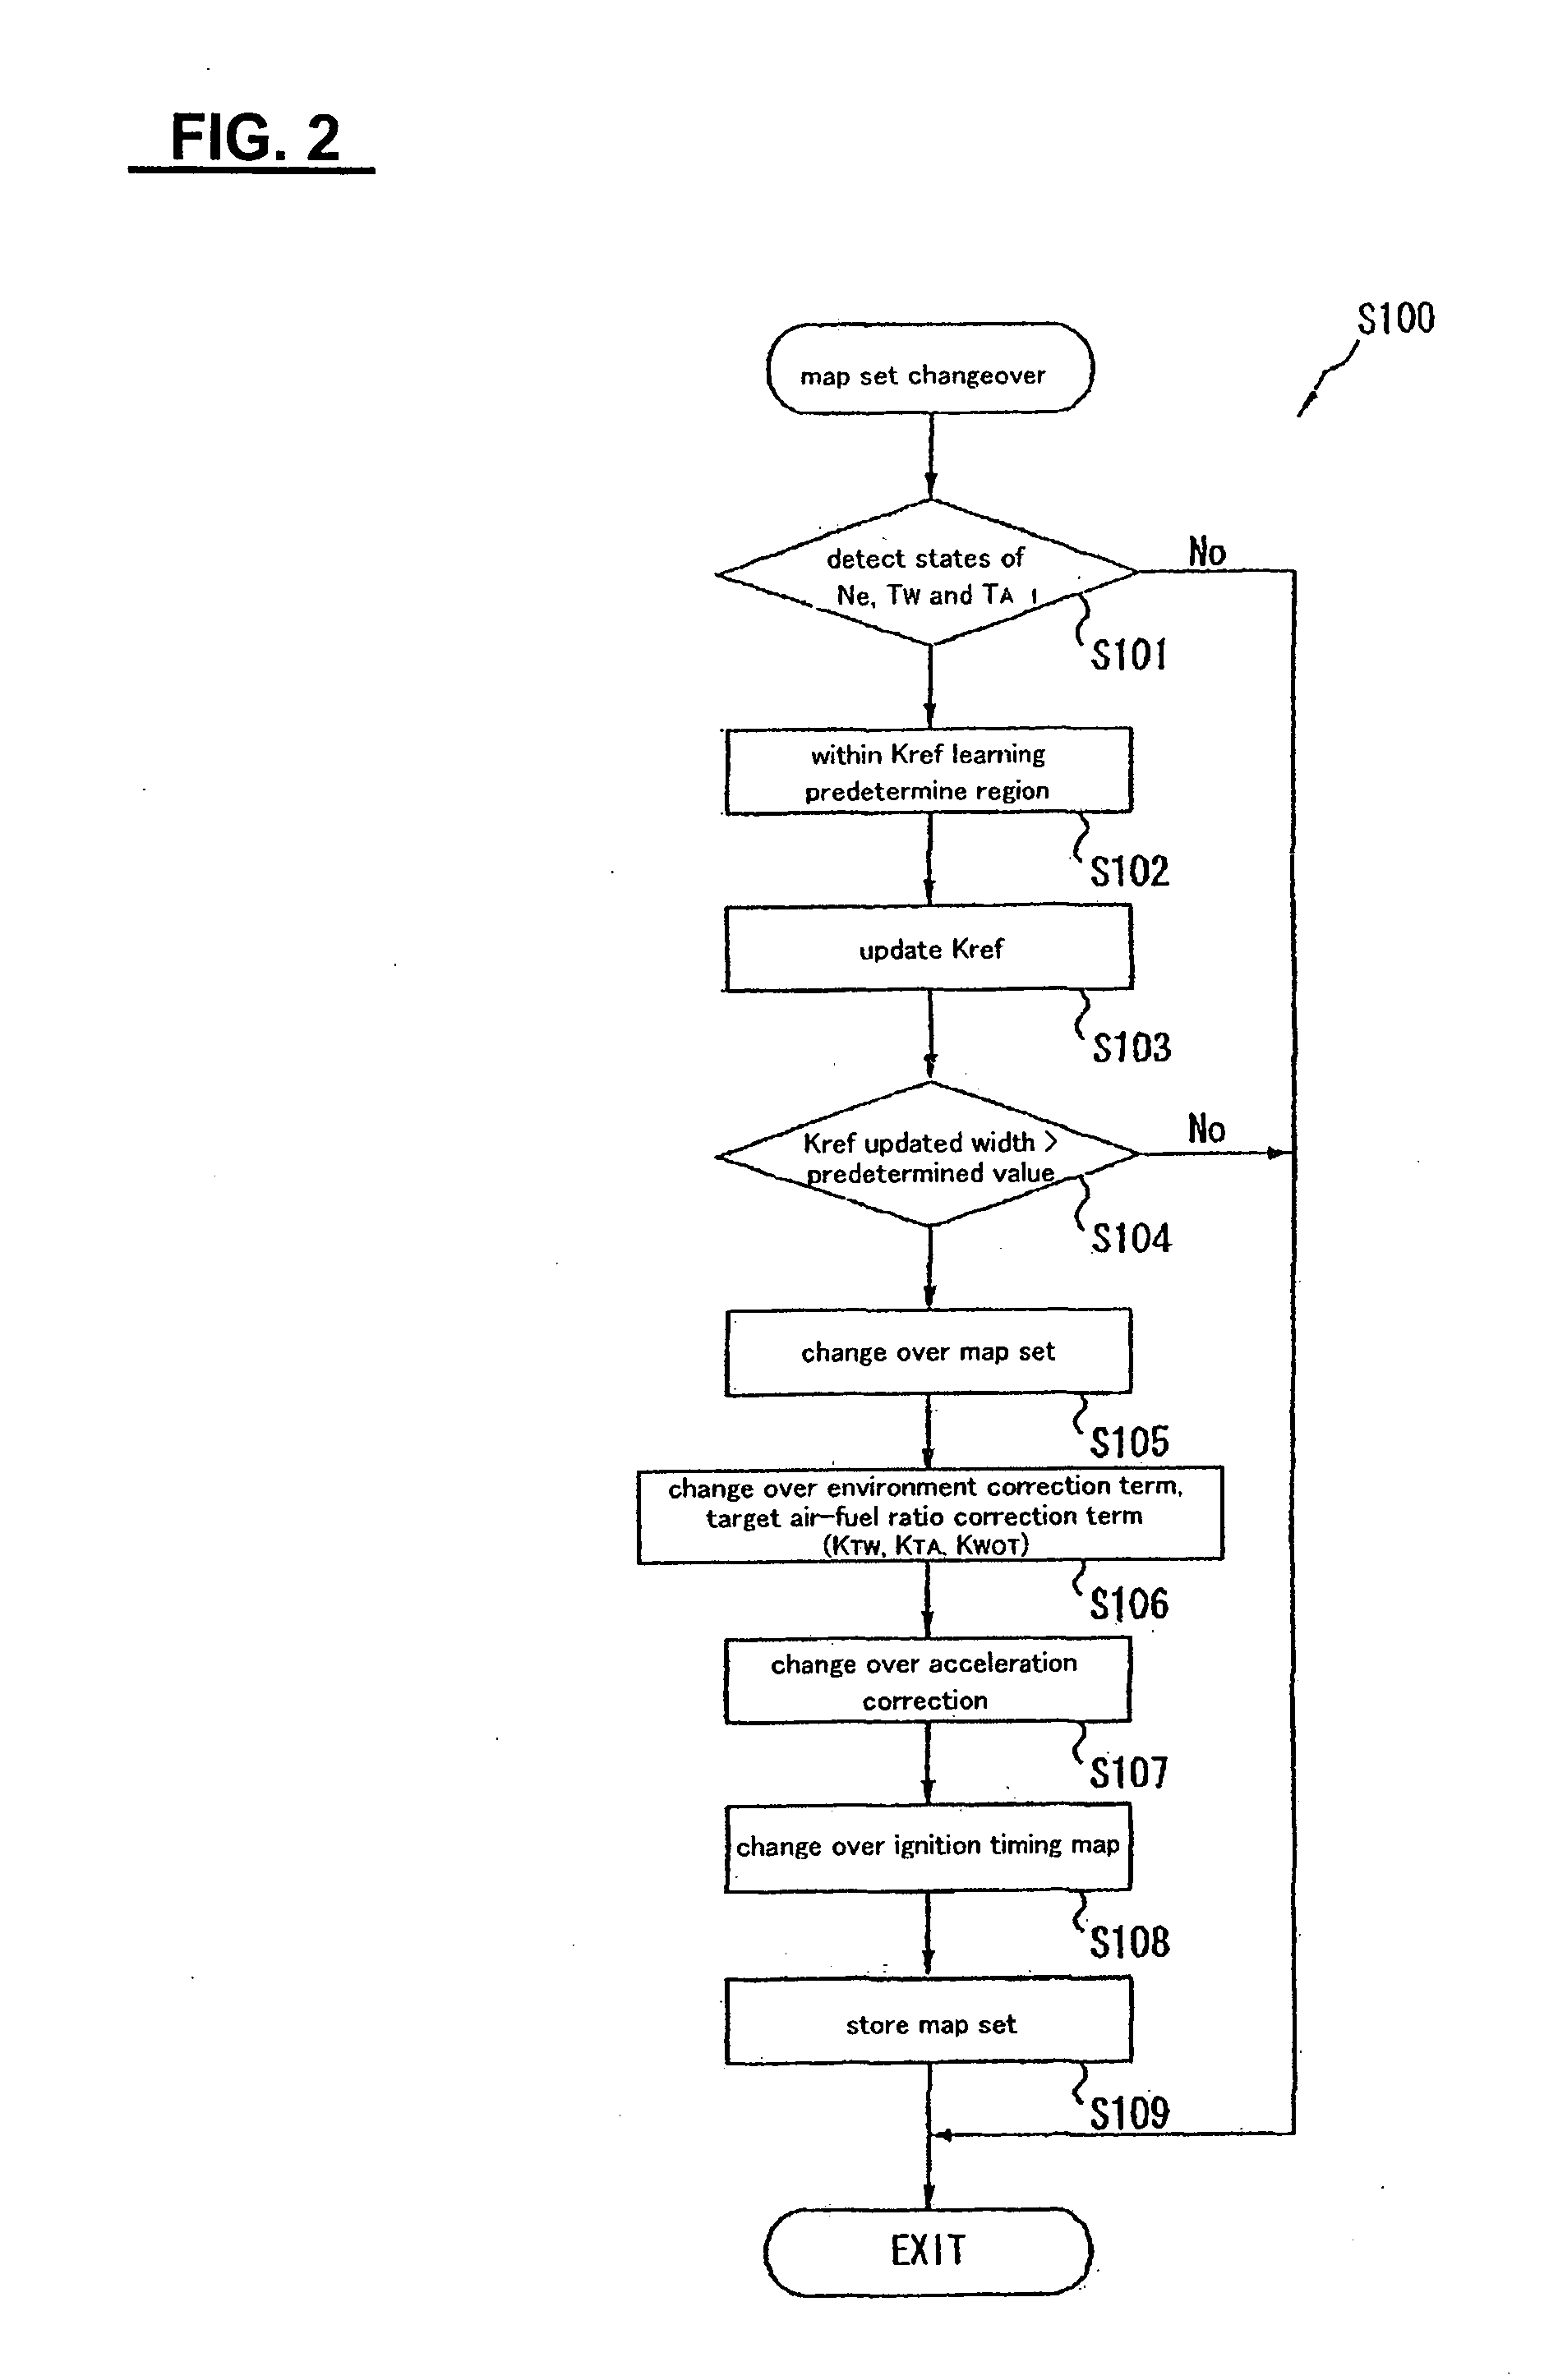 Fuel injection control device for a variable-fuel engine and engine incorporating same